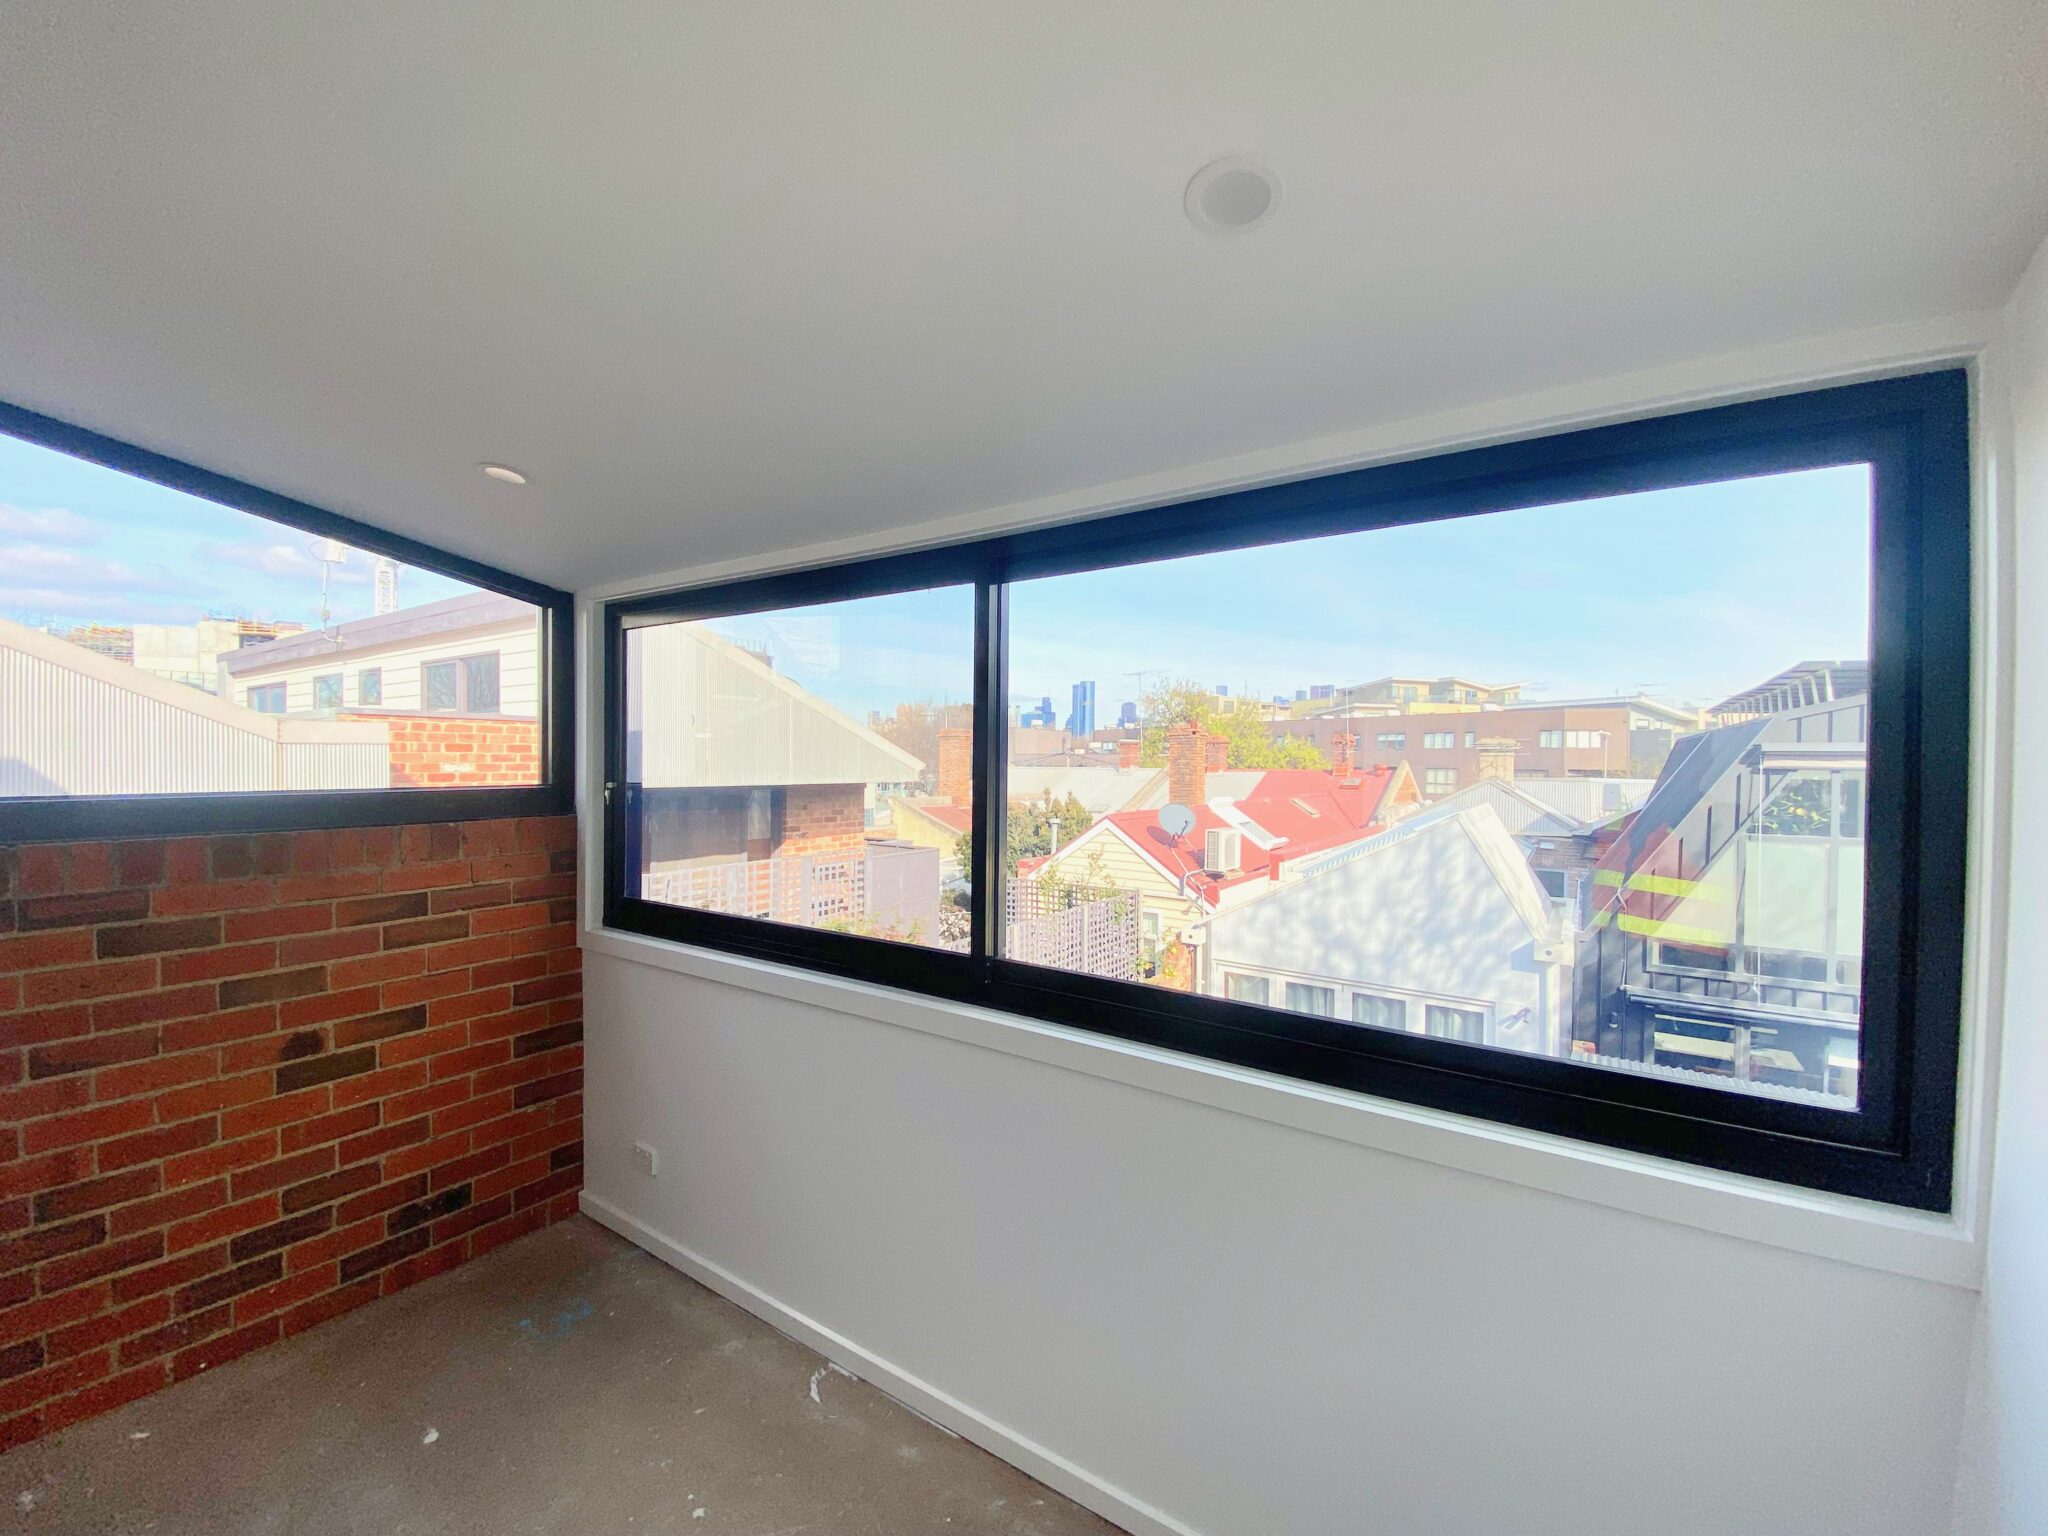 newly renovated room with red brick wall, large window showing view of Melbourne cityscape